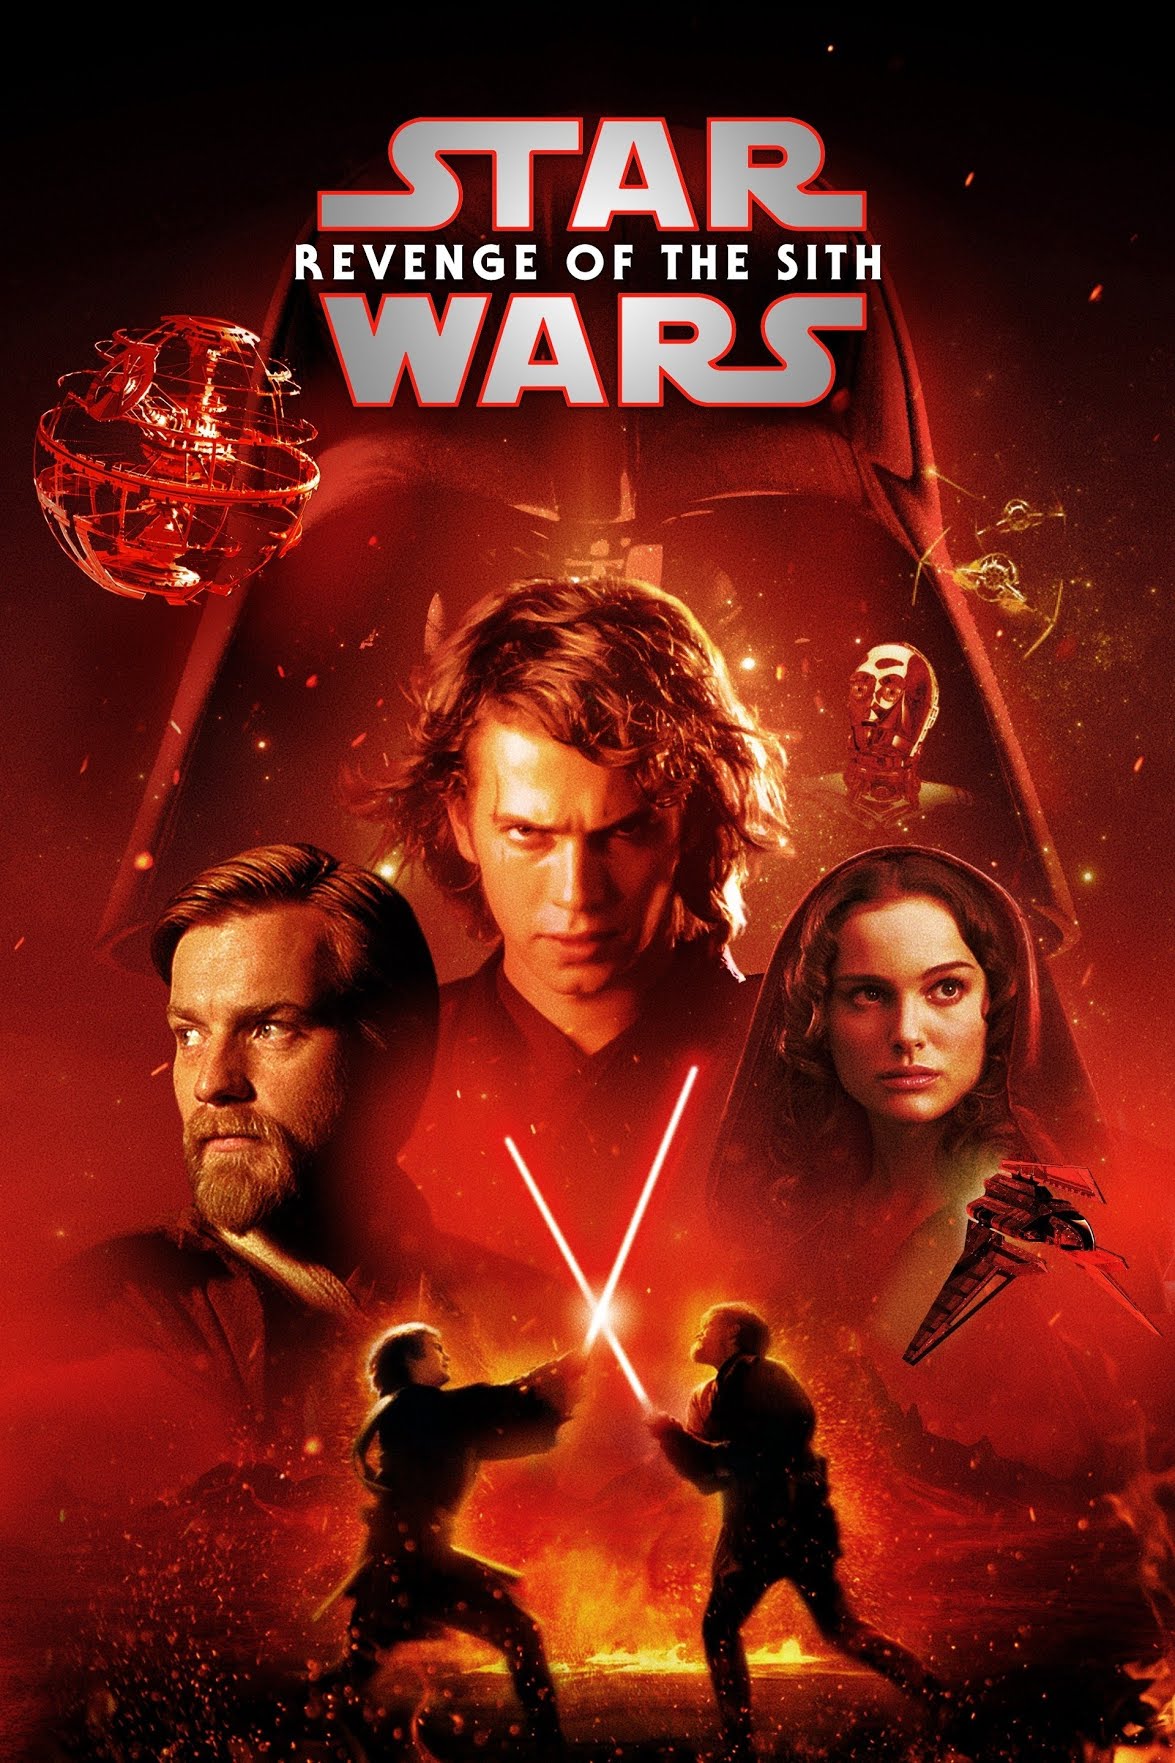 Star Wars: Episode III - Revenge of the Sith | List of Deaths Wiki